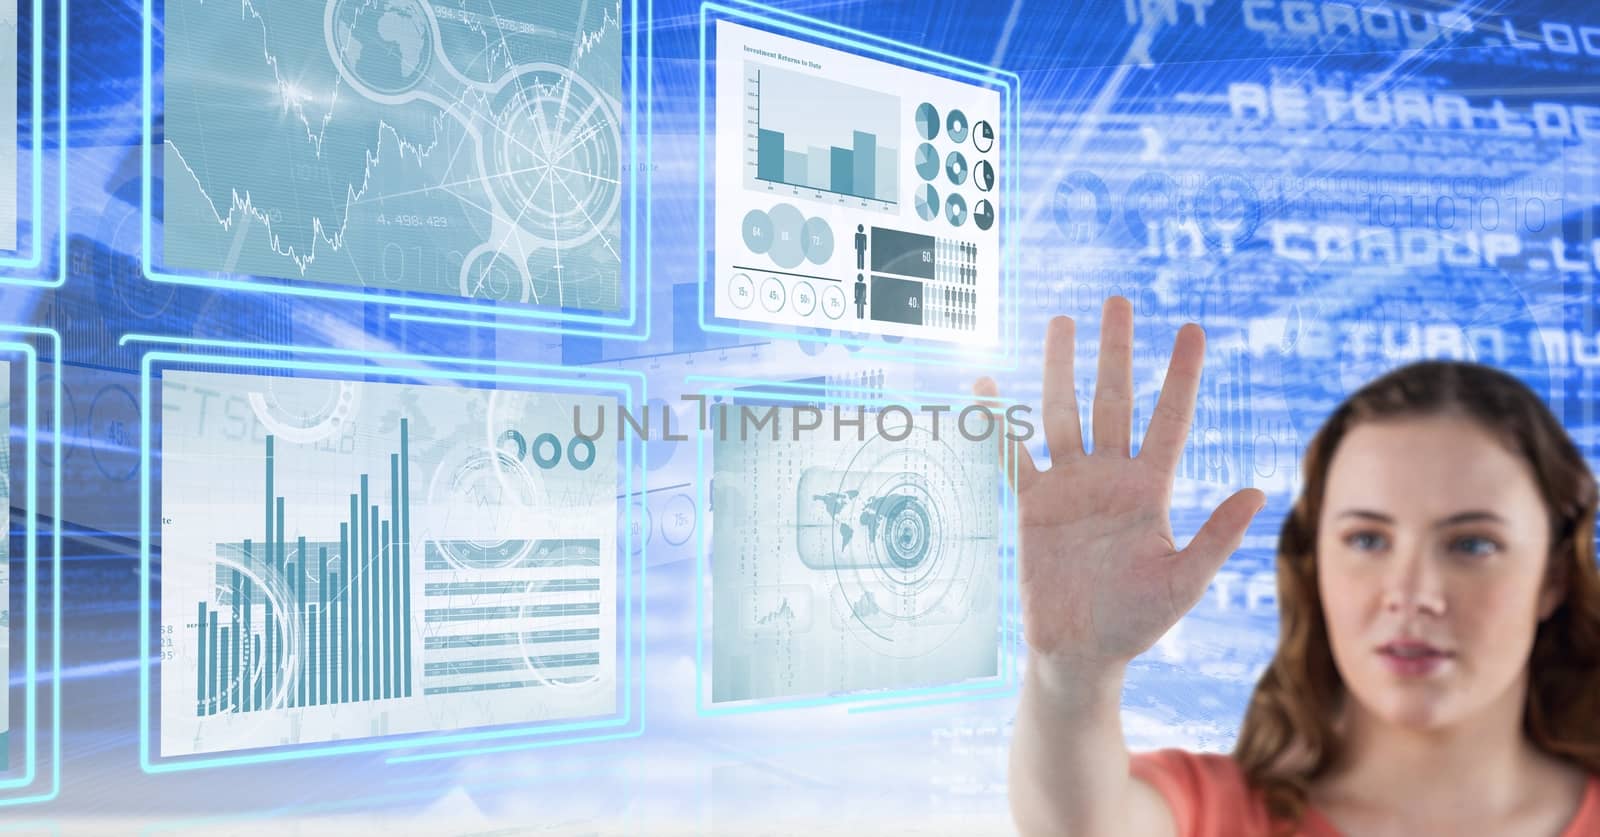 Digital composite of woman touching and interacting with technology interface panels